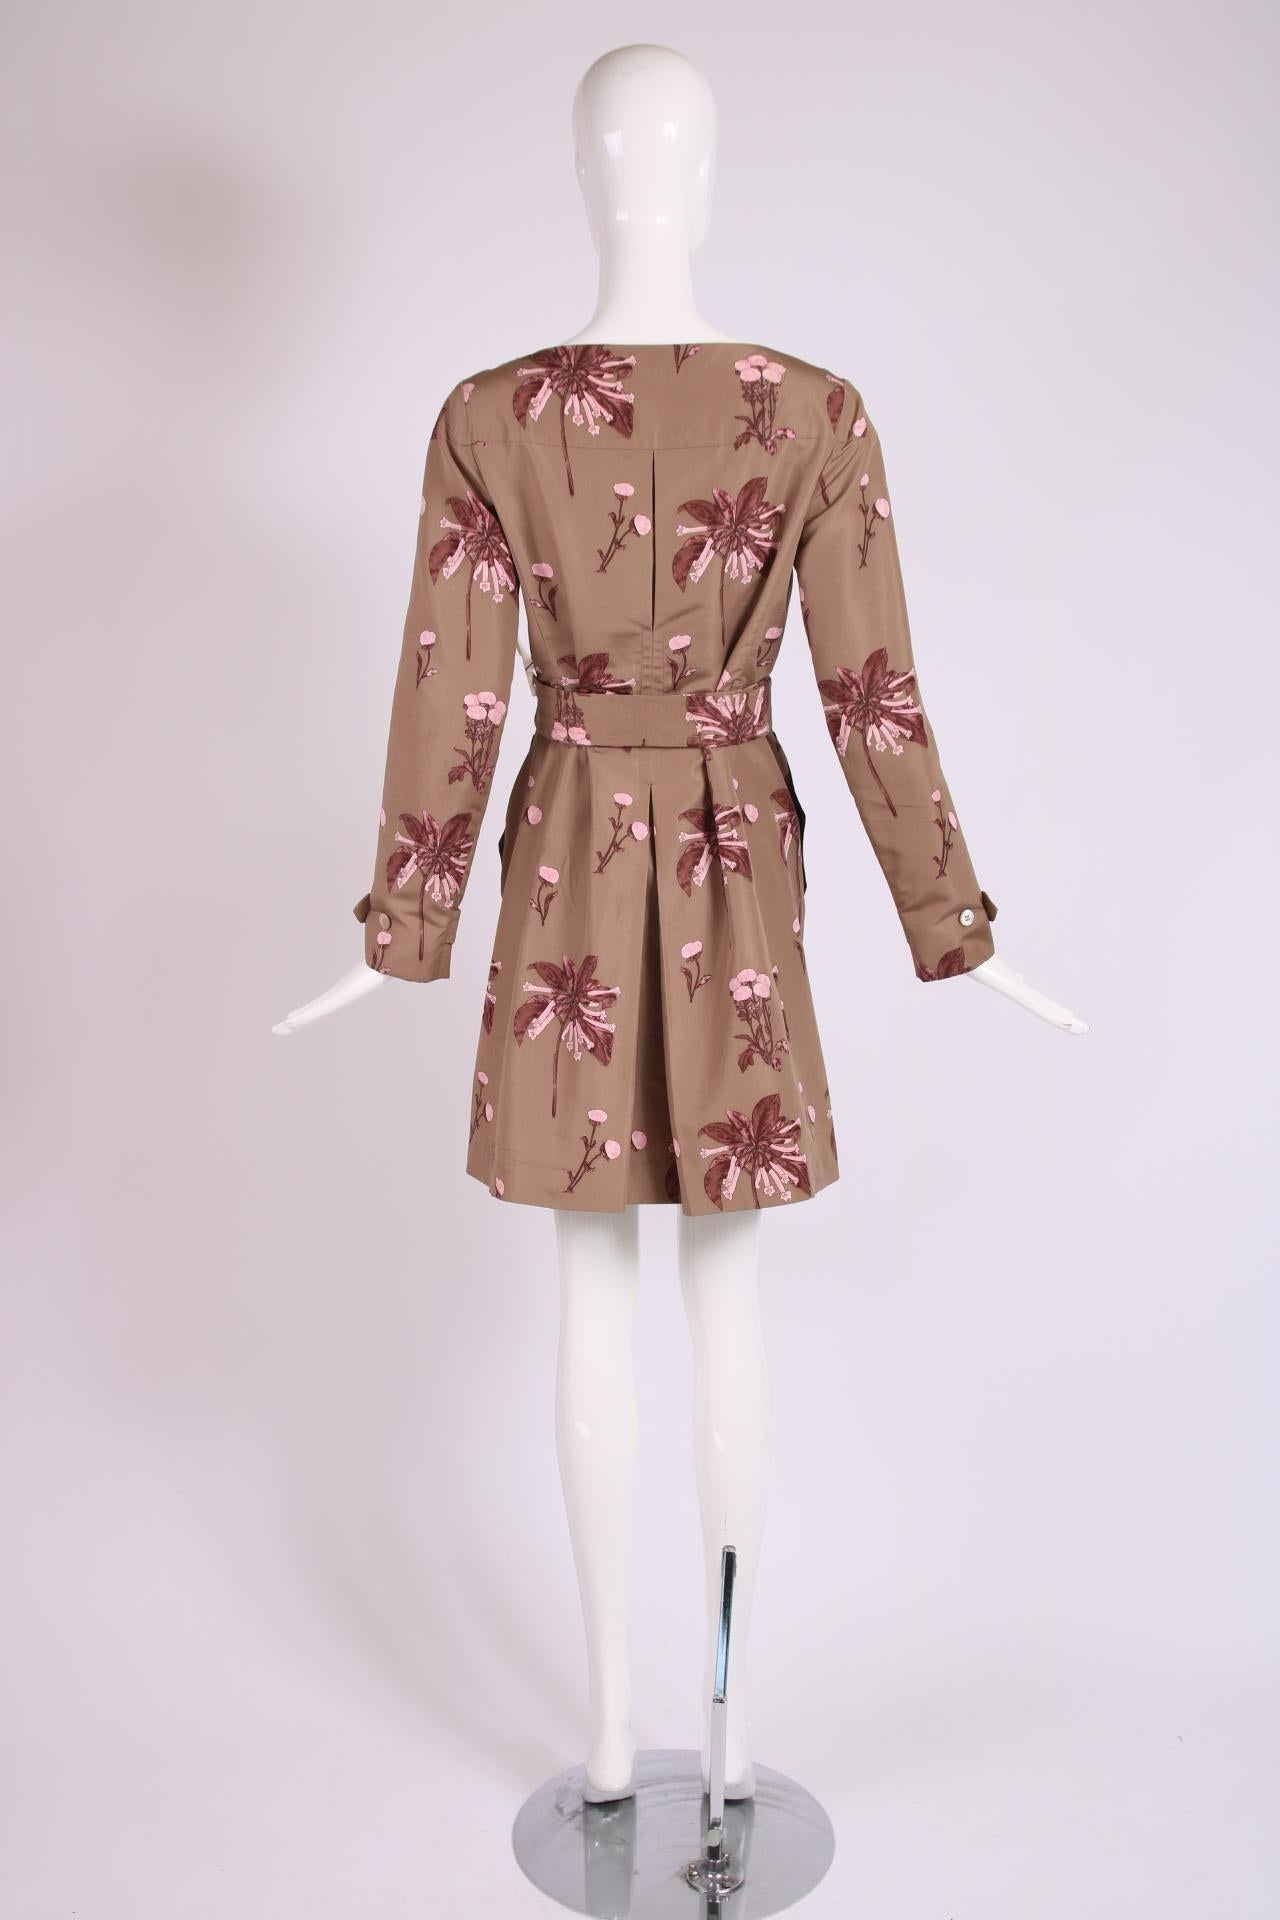 Prada Silk Foral Print Belted Coat In Excellent Condition For Sale In Studio City, CA